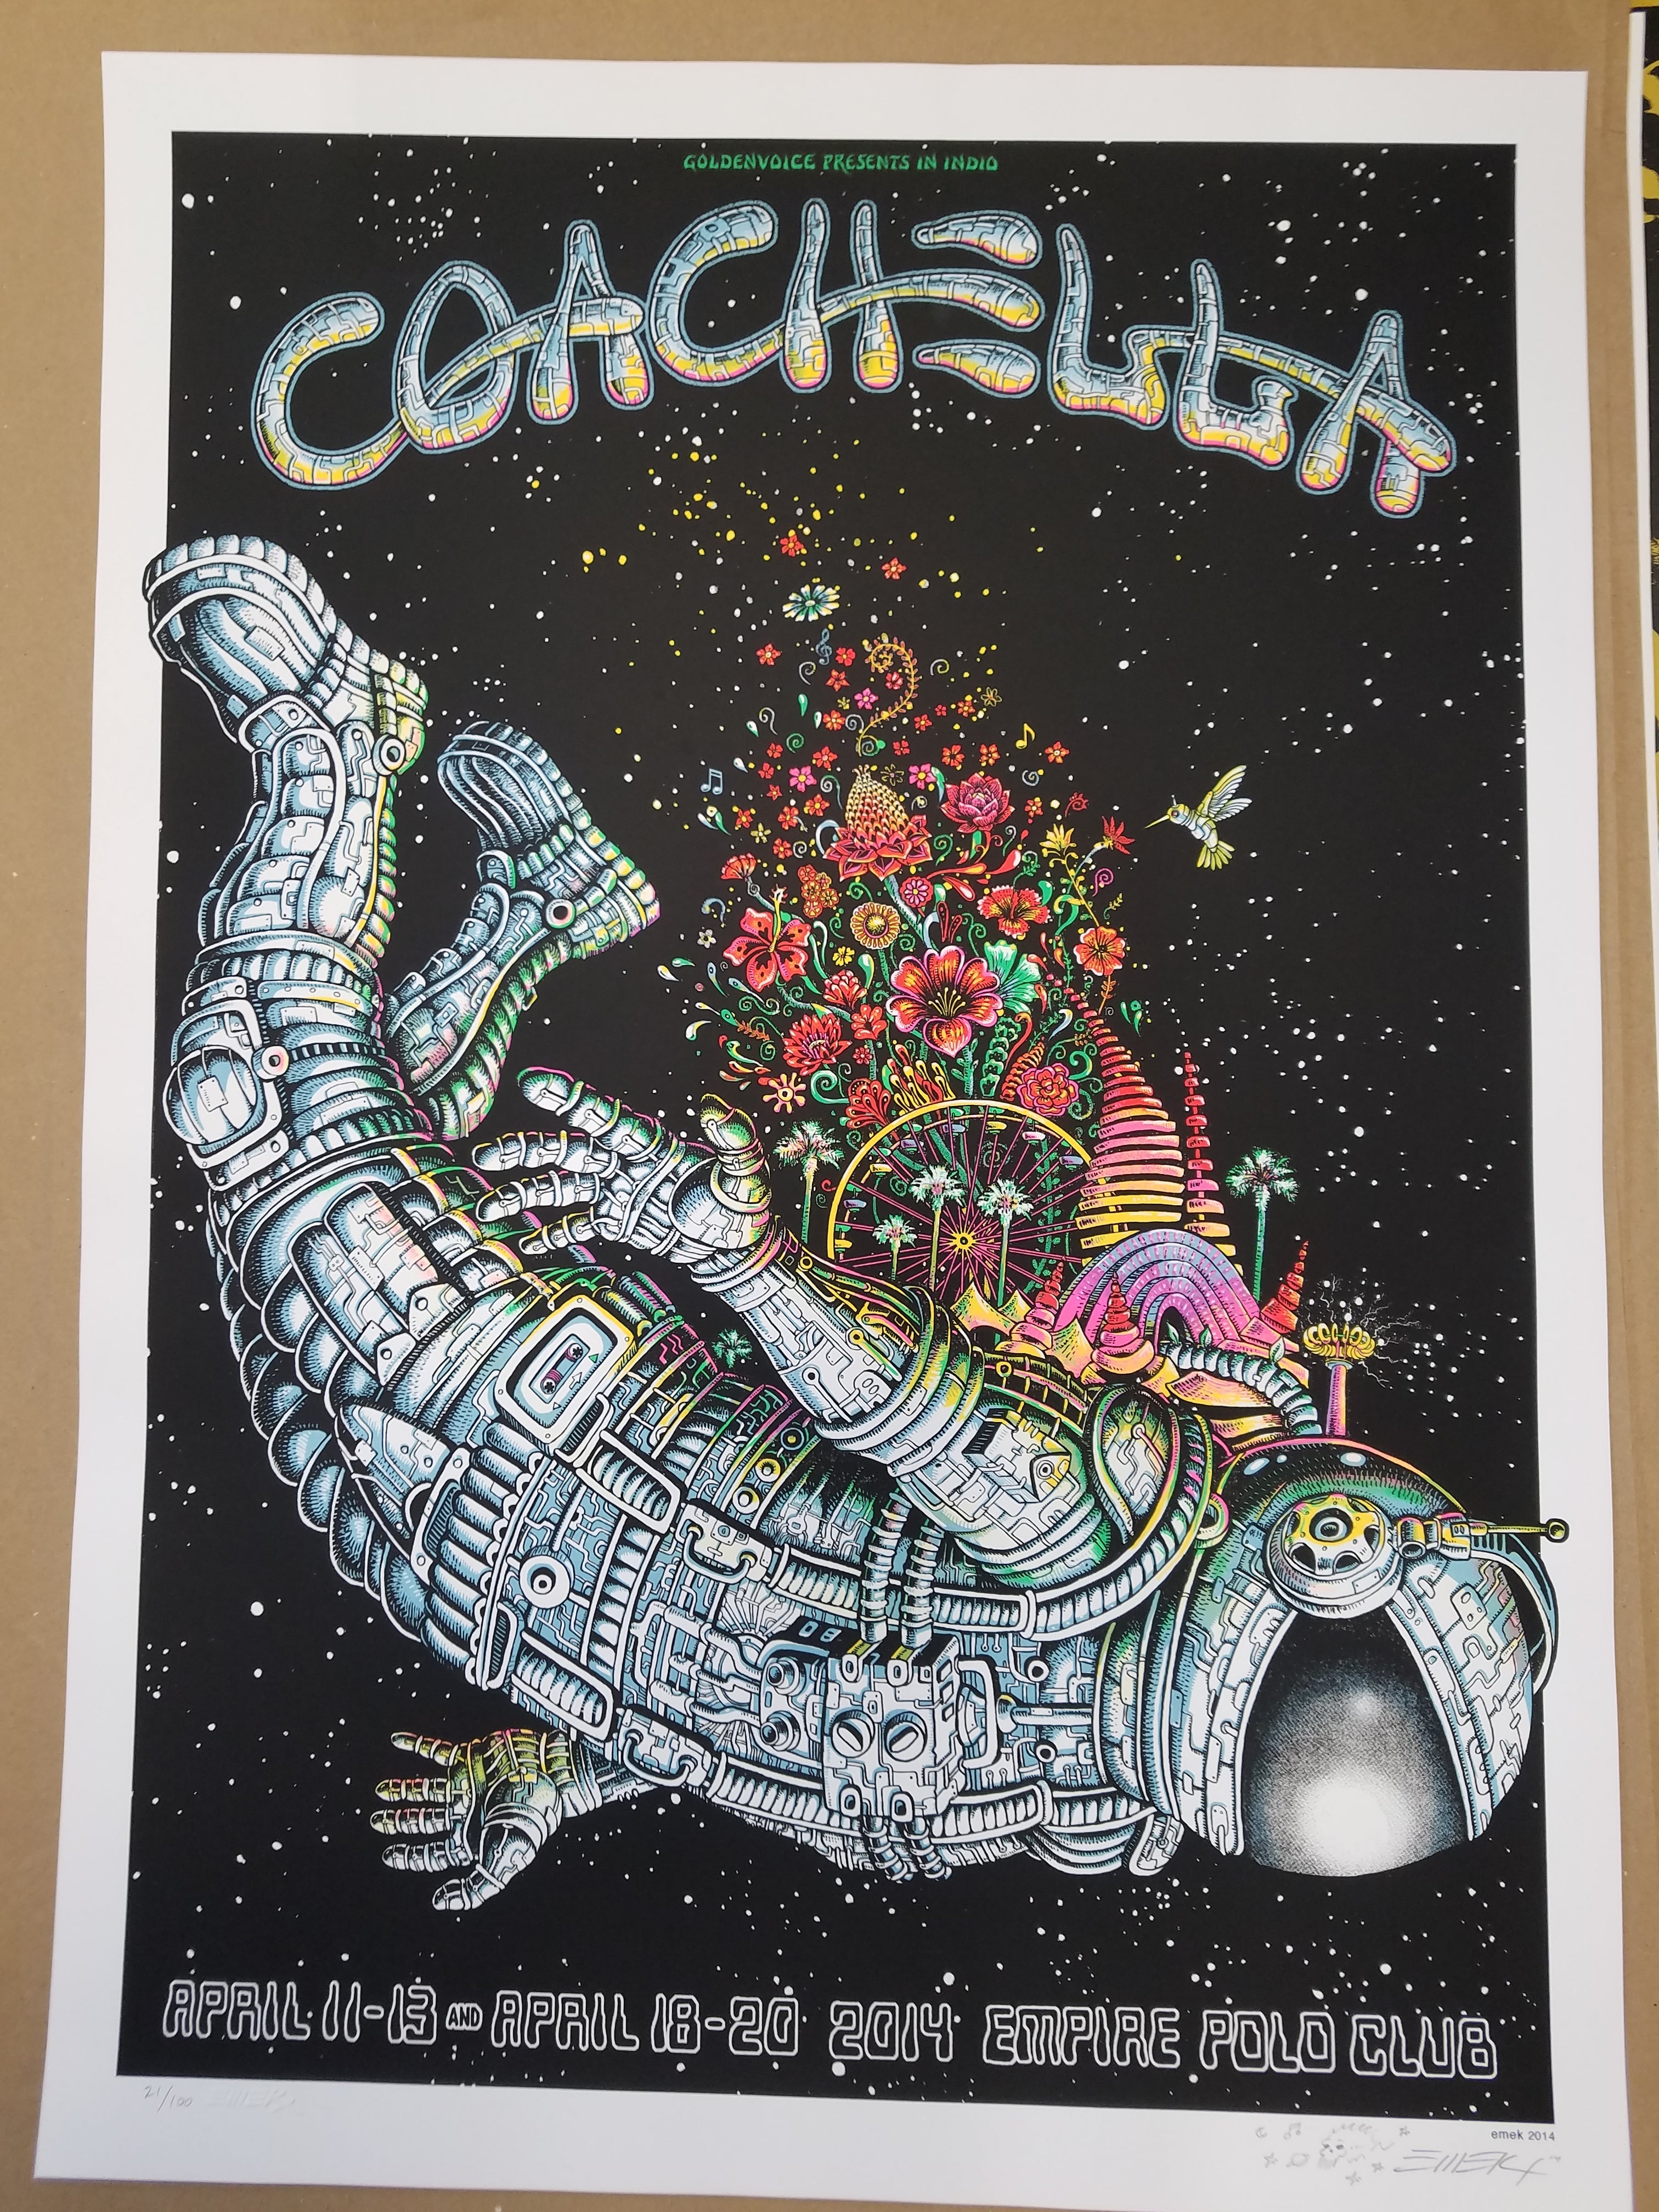 Title:  2014 Coachella Artist Proof by EMEK Glow In The Dark!  Artist:  Emek  Edition:  April 11, 2014 xx/100, s/n  Type:  GLOW-IN-THE-DARK and Black Light Reactive  Size:  18" x 24"  Location:  2014 Empire Polo Club  Venue:  Indio, CA  Notes:  In hand ready to ship.  Check out our other listings for more hard-to-find and out-of-print posters.